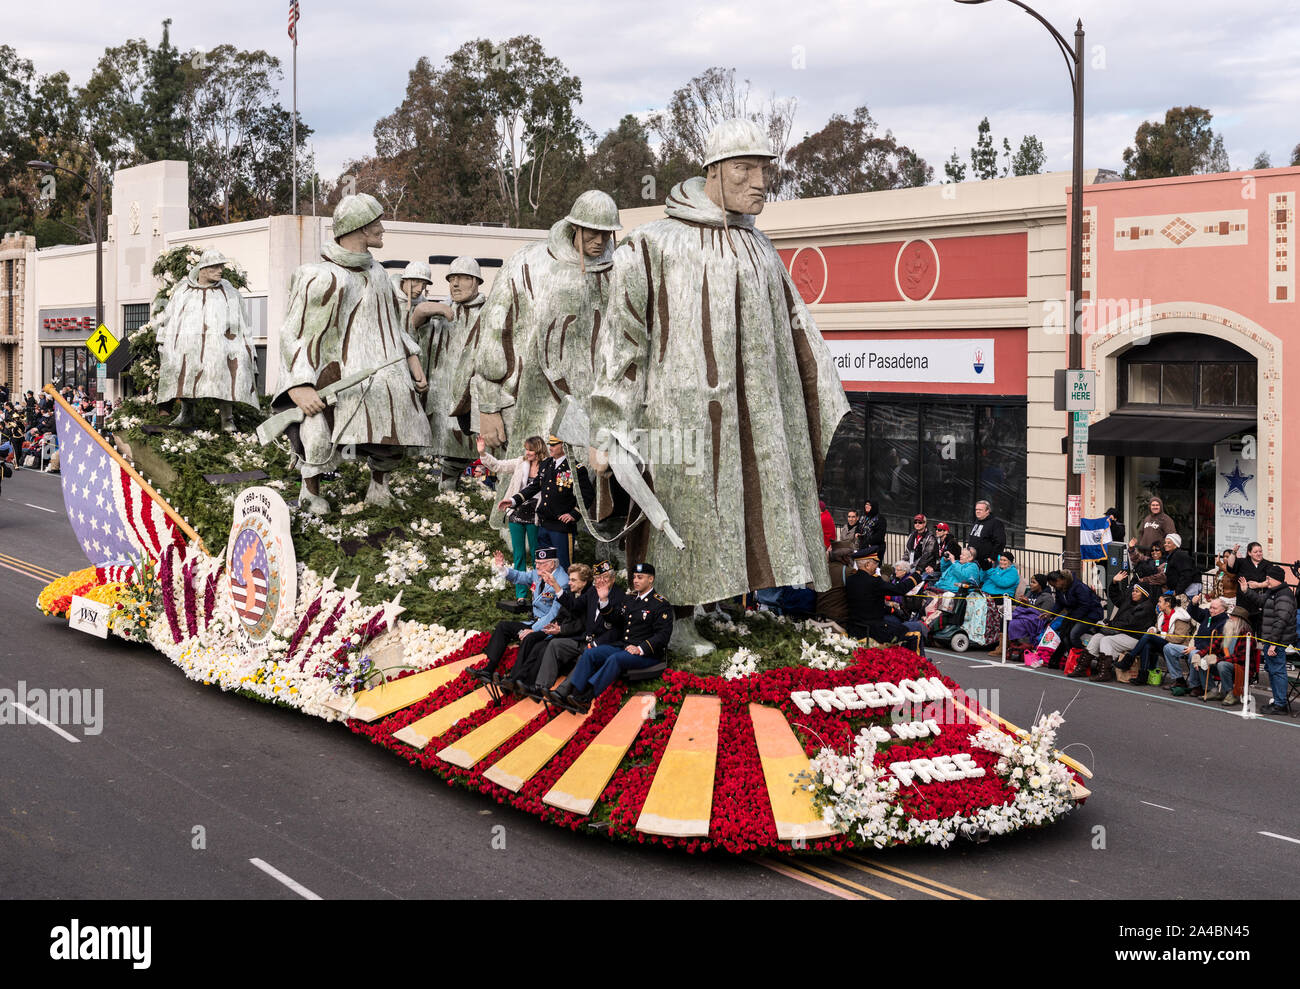 The Department of Defense Freedom is Not Free float, commemorating the 60th anniversary of the Korean War, in the 124th Rose Parade in Pasadena, California Stock Photo